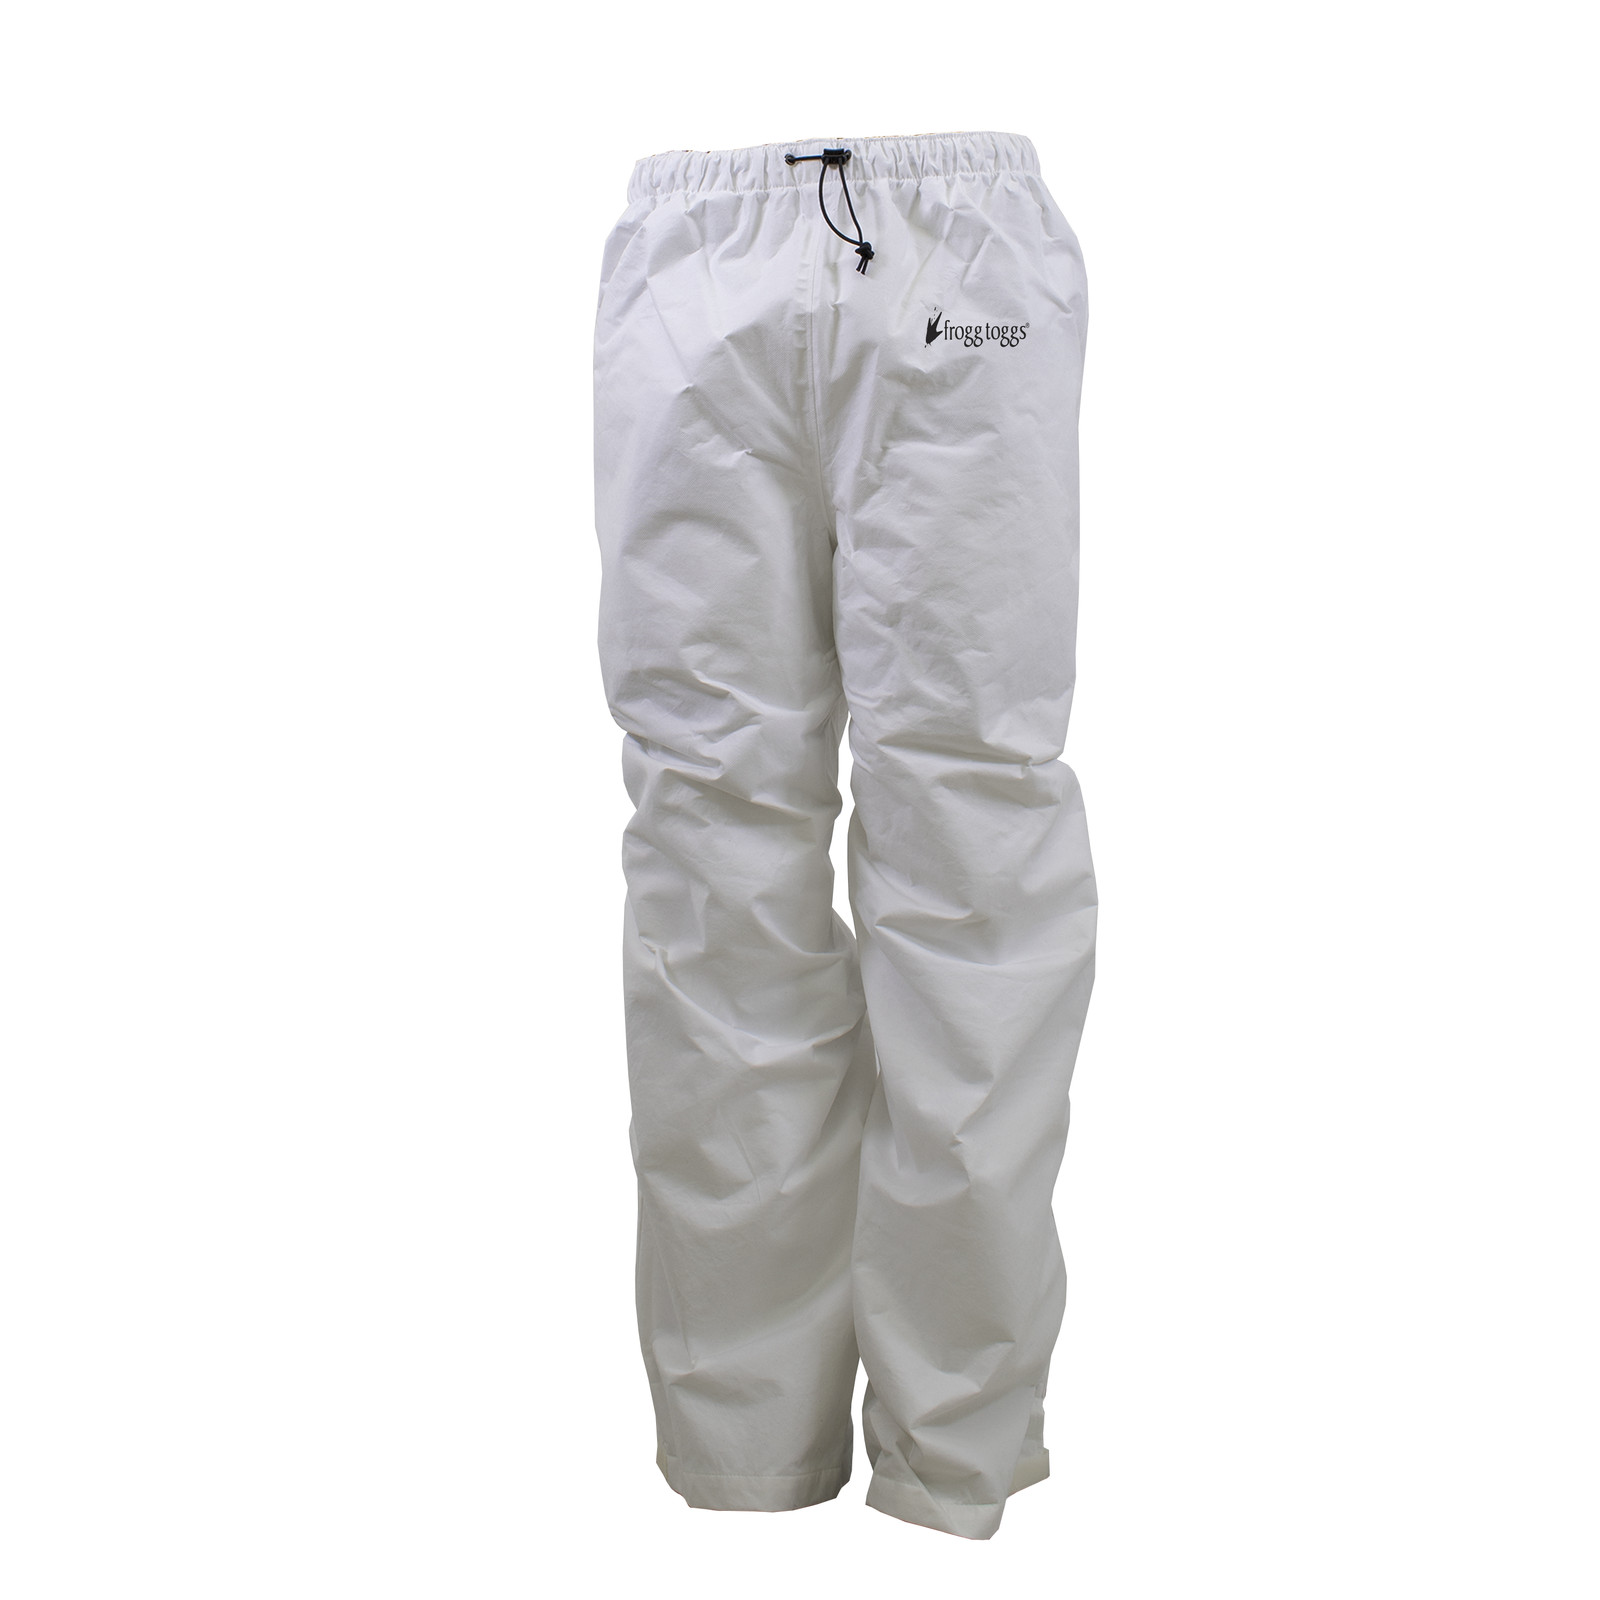 frogg toggs® All Sport Rain Suit pant